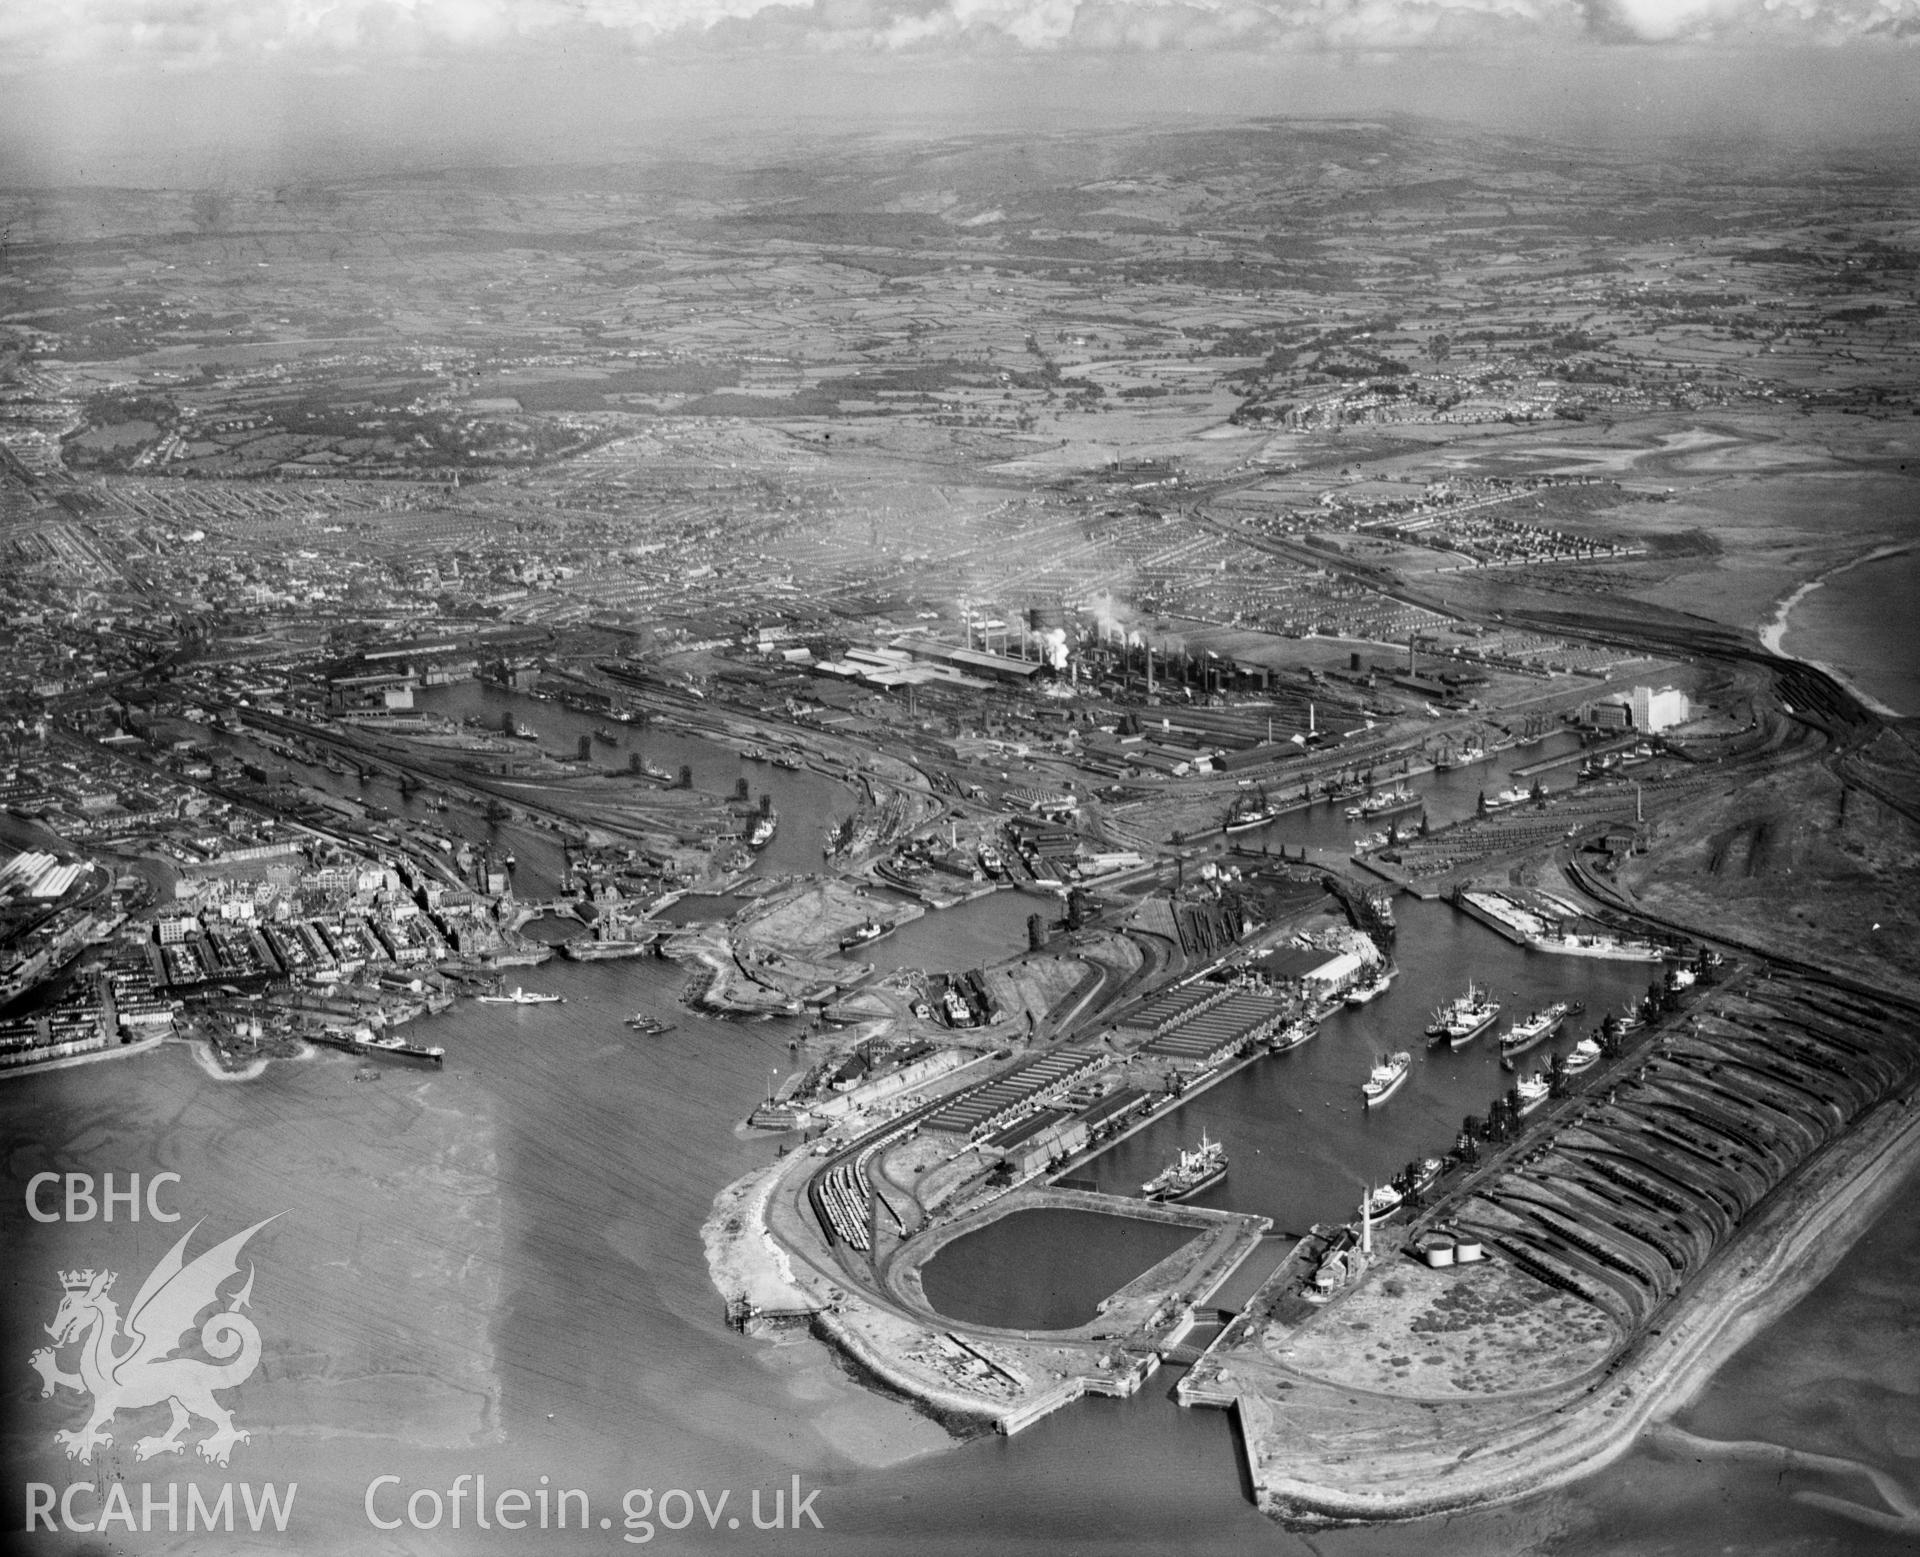 General view of Cardiff showing docks, oblique aerial view. 5?x4? black and white glass plate negative.